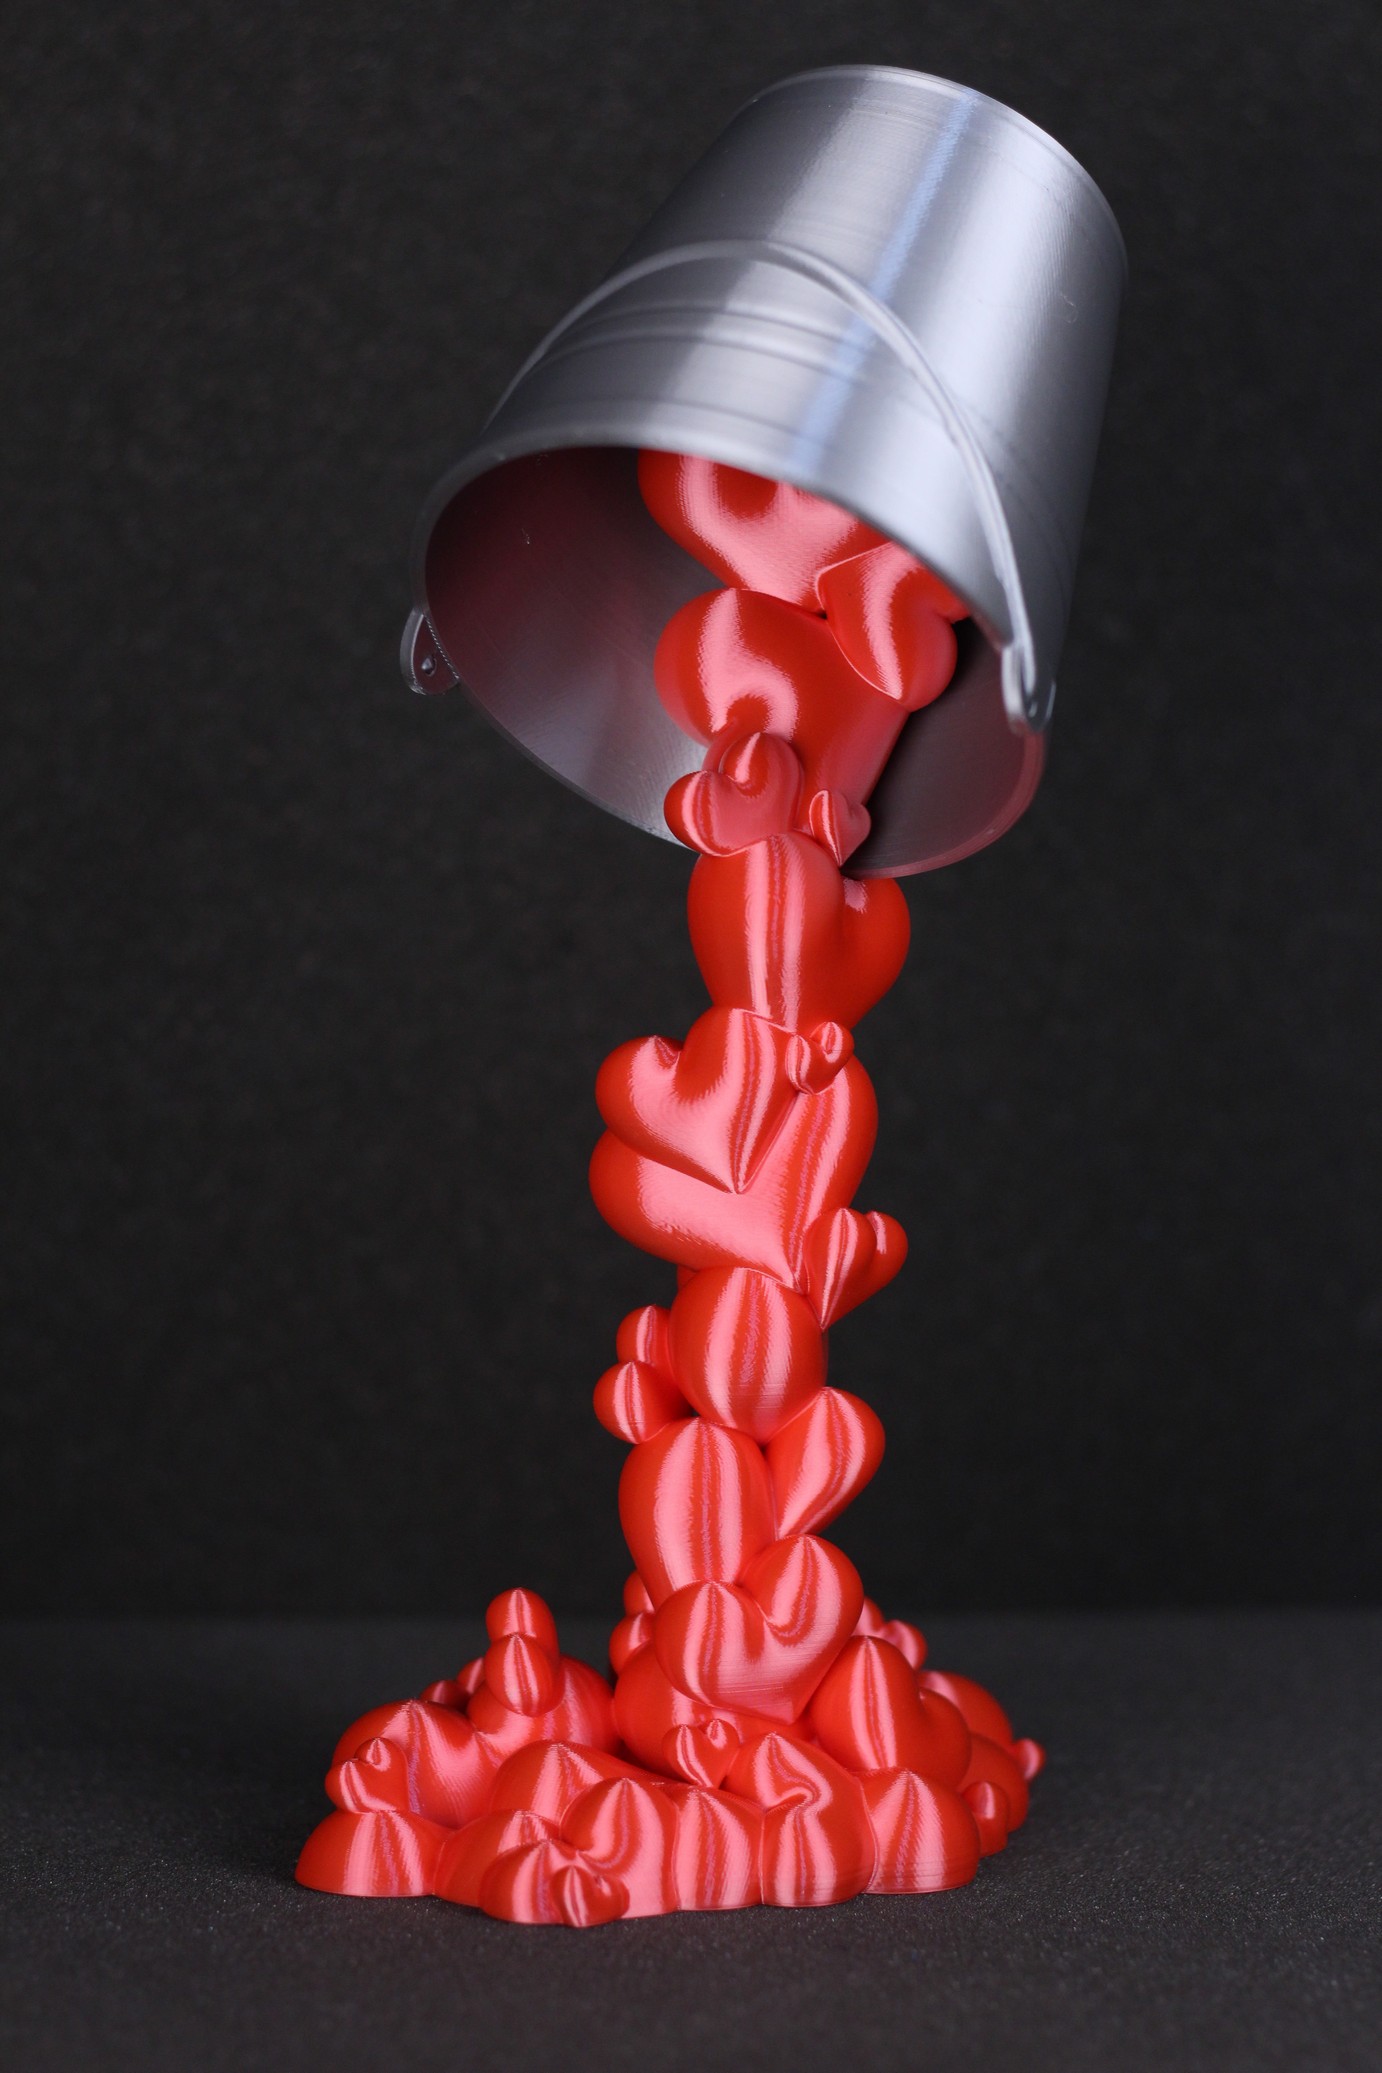 Pouring Hearts printed on Ender 3 S1 2 | Creality Ender 3 S1 Review: Almost Perfect